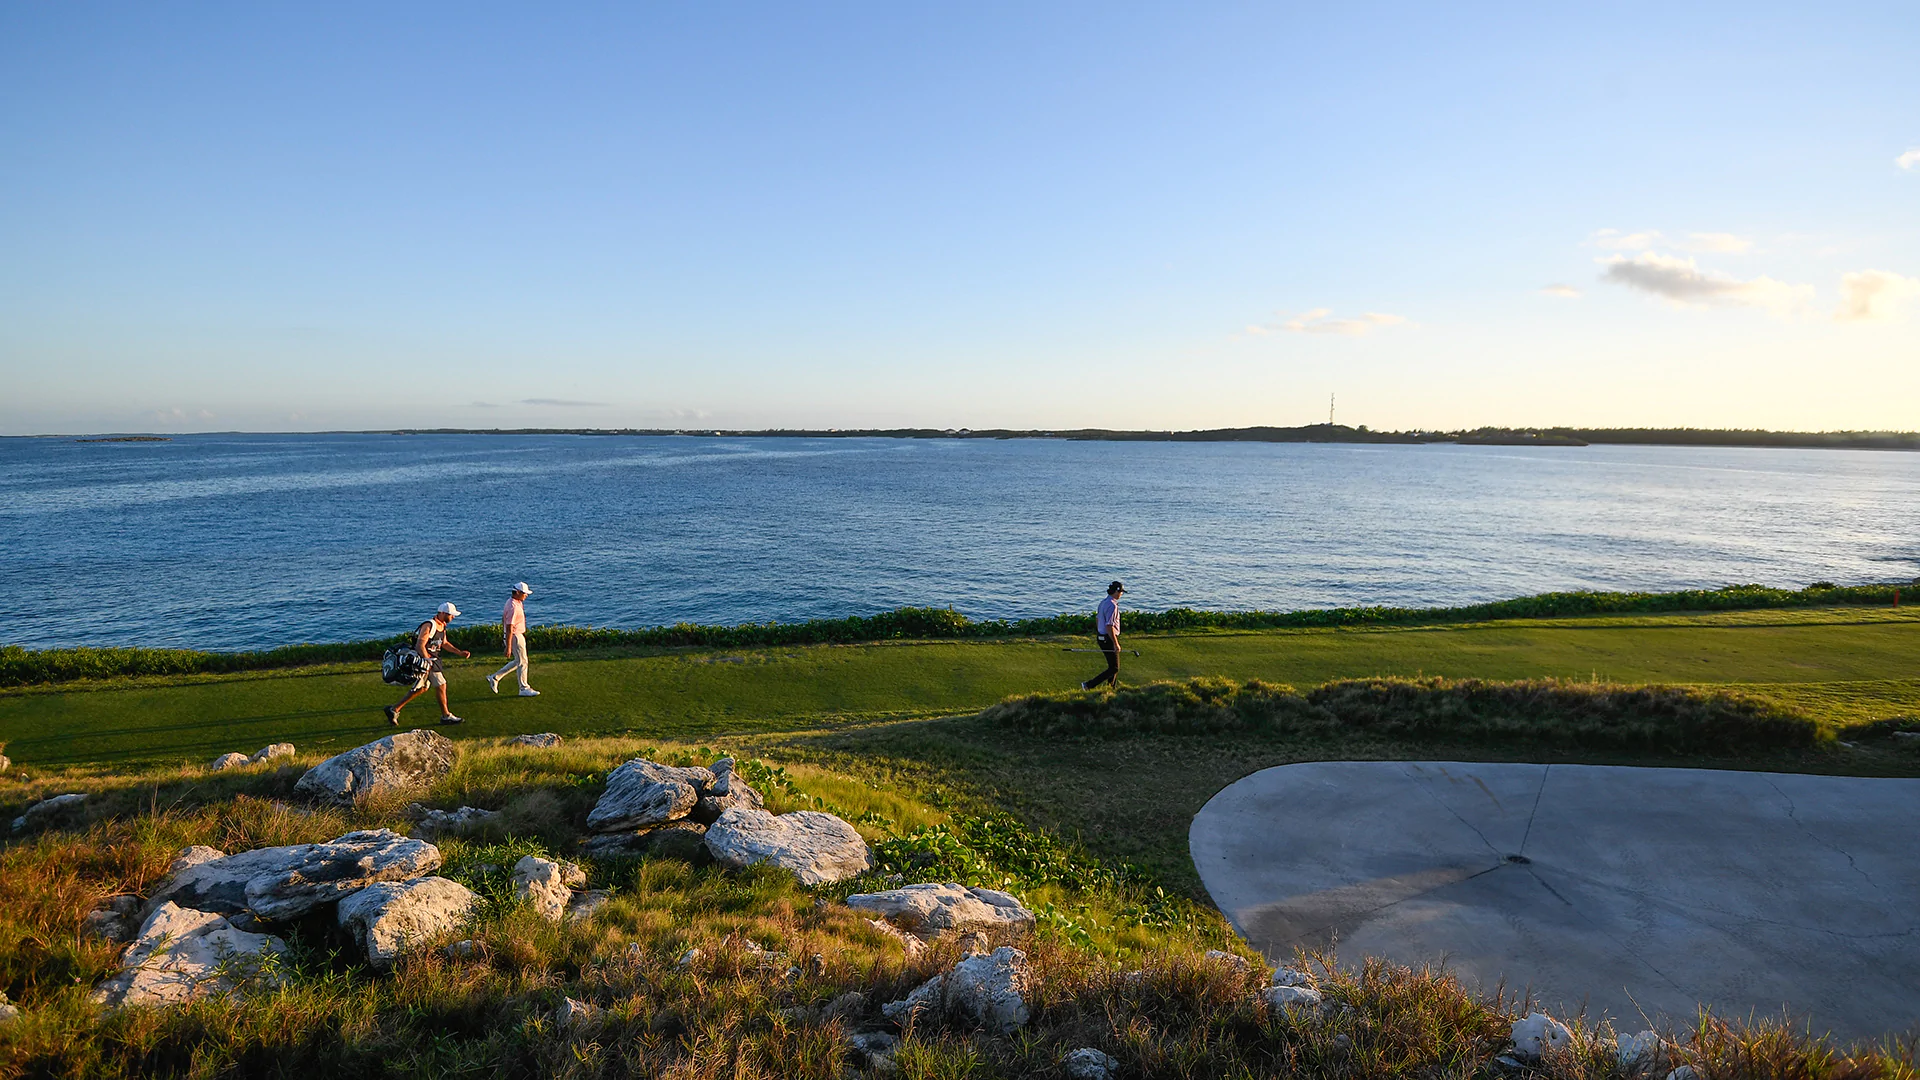 First-round play suspended after windy day in Bahamas